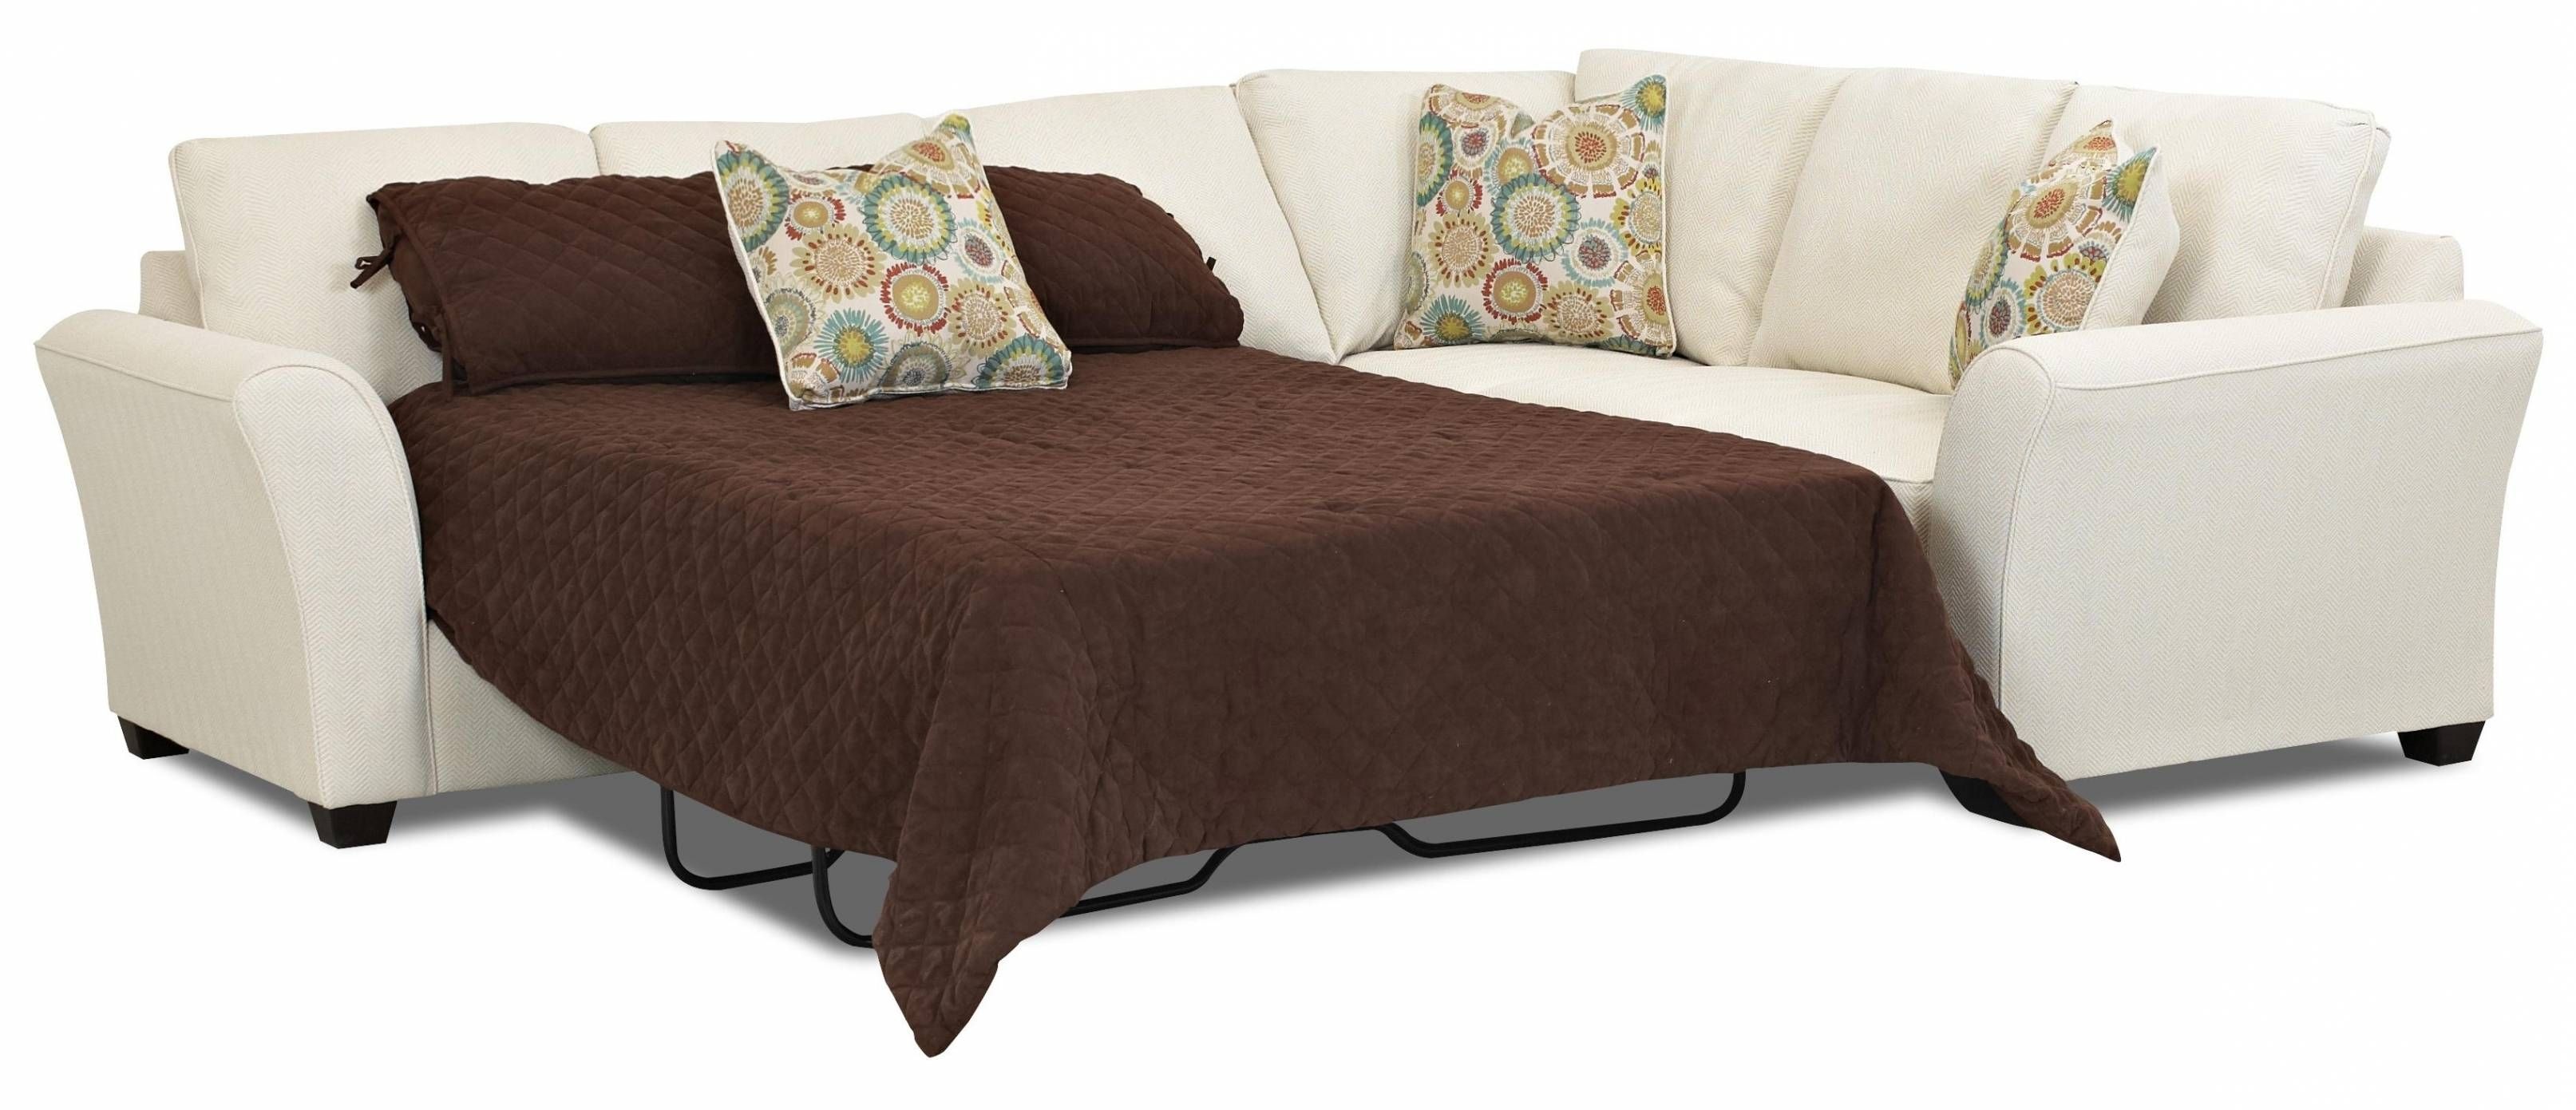 Clarke Fabric 2 Piece Chaise Sectional Queen Sleeper Sofa Bed Intended For Sleeper Sectional Sofas (Photo 22 of 30)